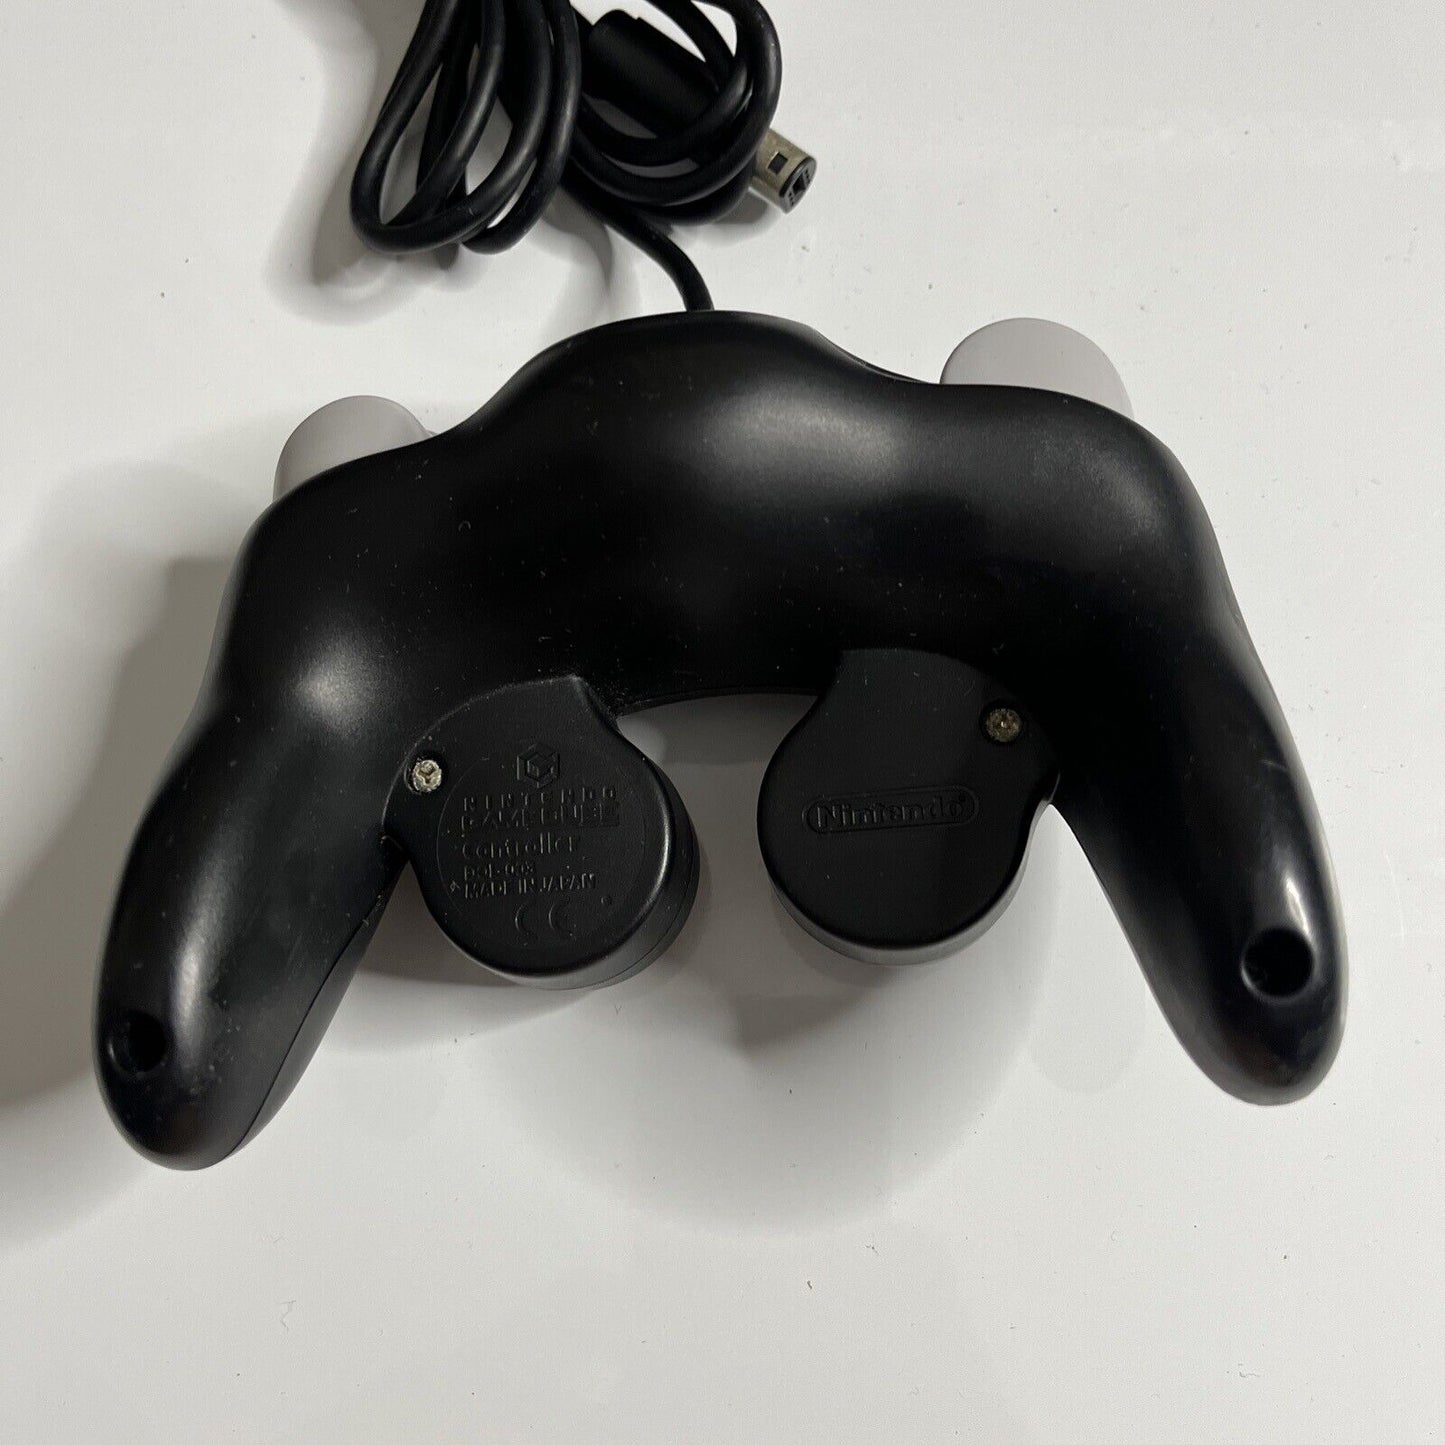 Official Nintendo GameCube Controller Black - Genuine tested and cleaned